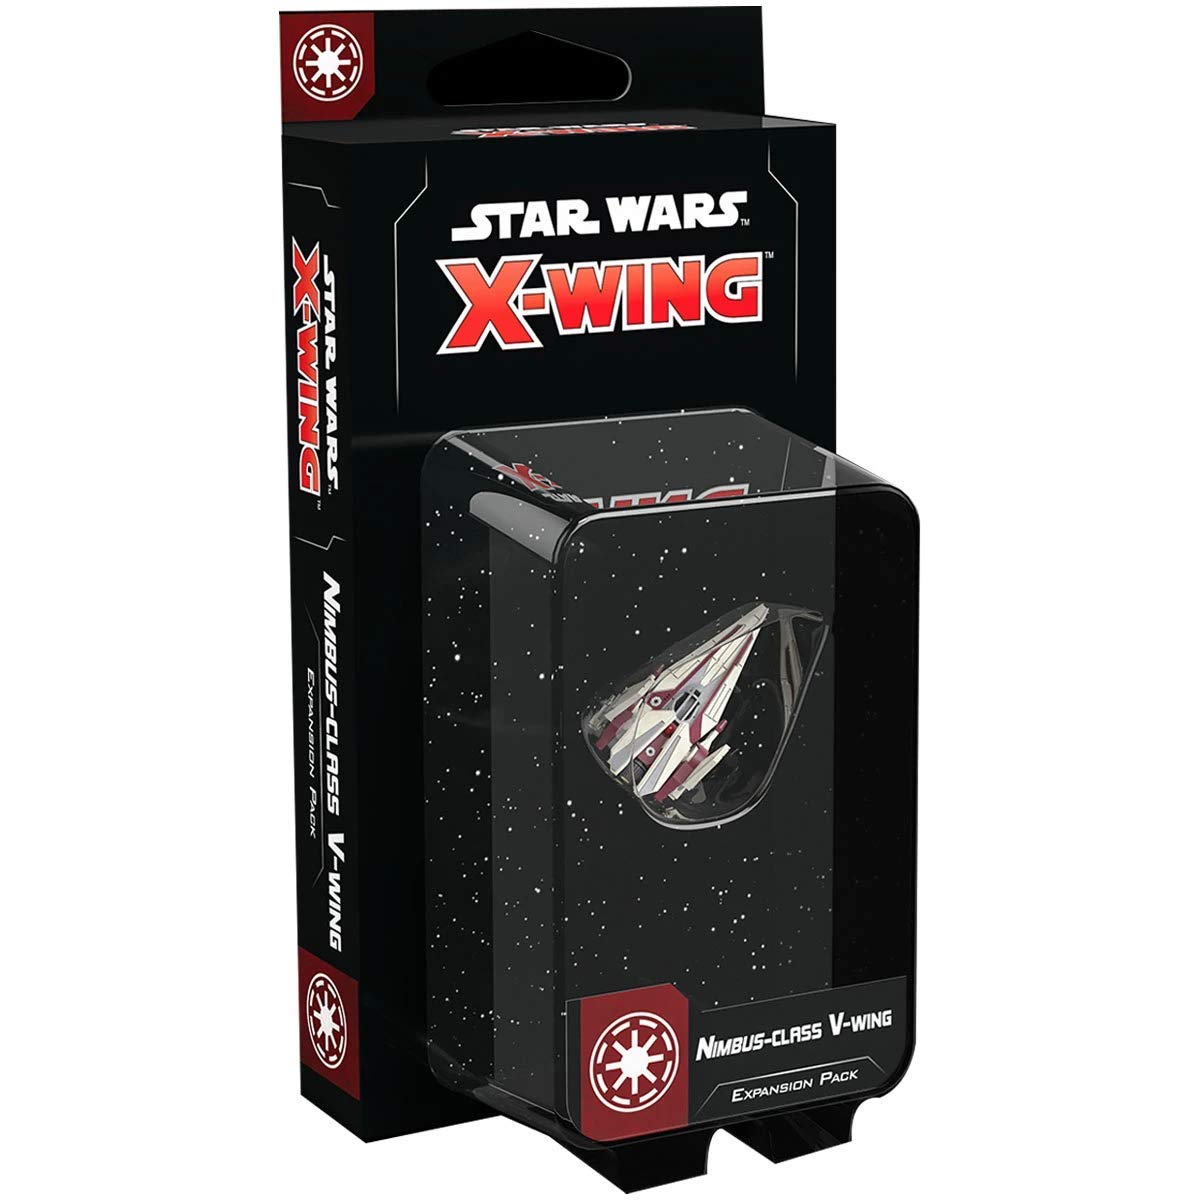 Star Wars X-Wing 2nd Edition Miniatures Game Nimbus-Class V-Wing EXPANSION PACK | Strategy Game for Adults and Teens | Ages 14+ | 2 Players | Average Playtime 45 Minutes | Made by Atomic Mass Games